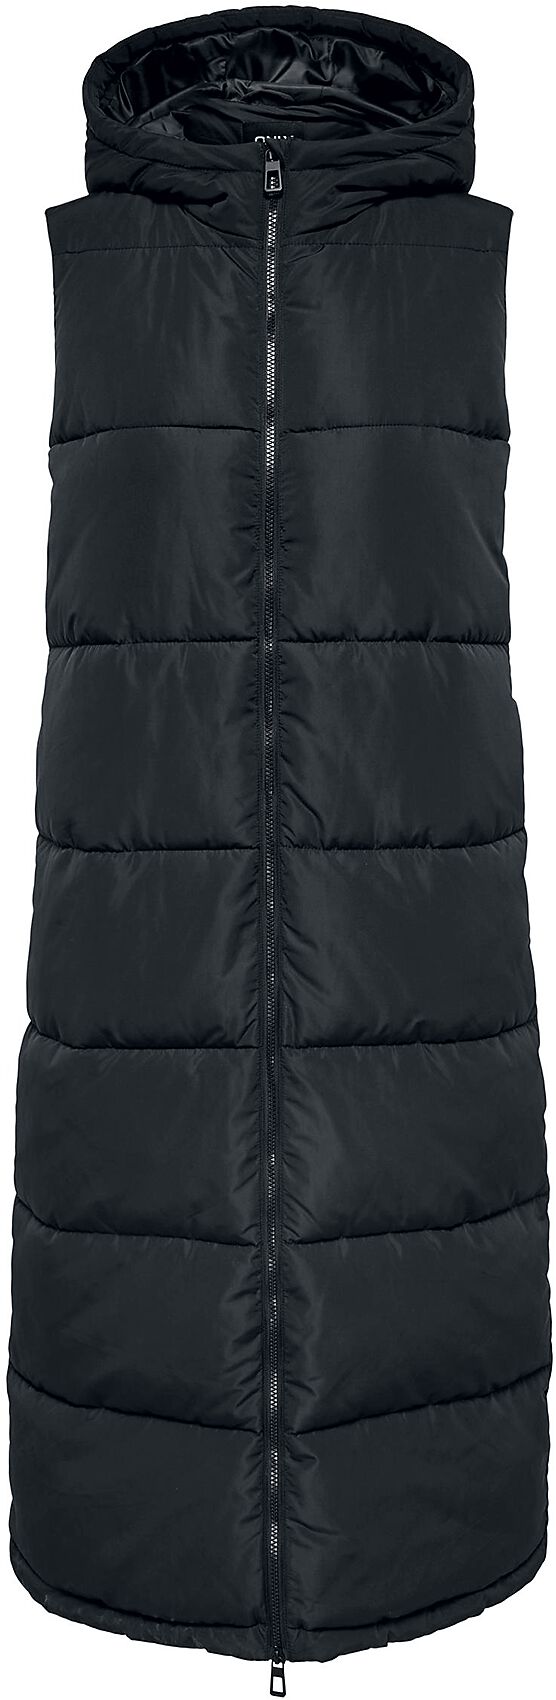 Image of Gilet di Only - Alina long waistcoat - XS a S - Donna - nero